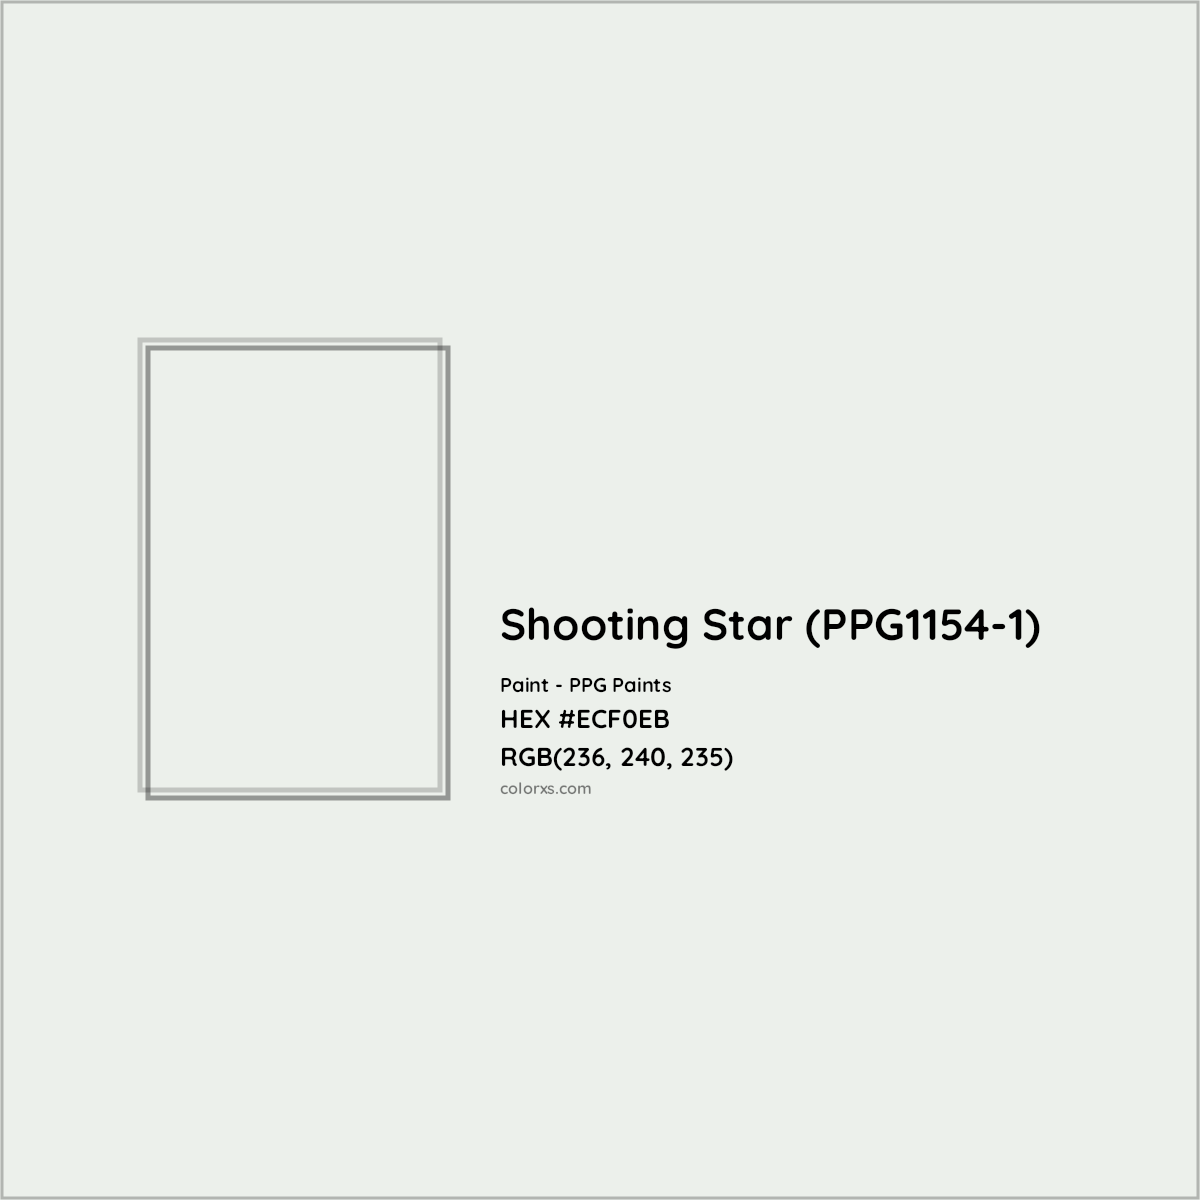 HEX #ECF0EB Shooting Star (PPG1154-1) Paint PPG Paints - Color Code